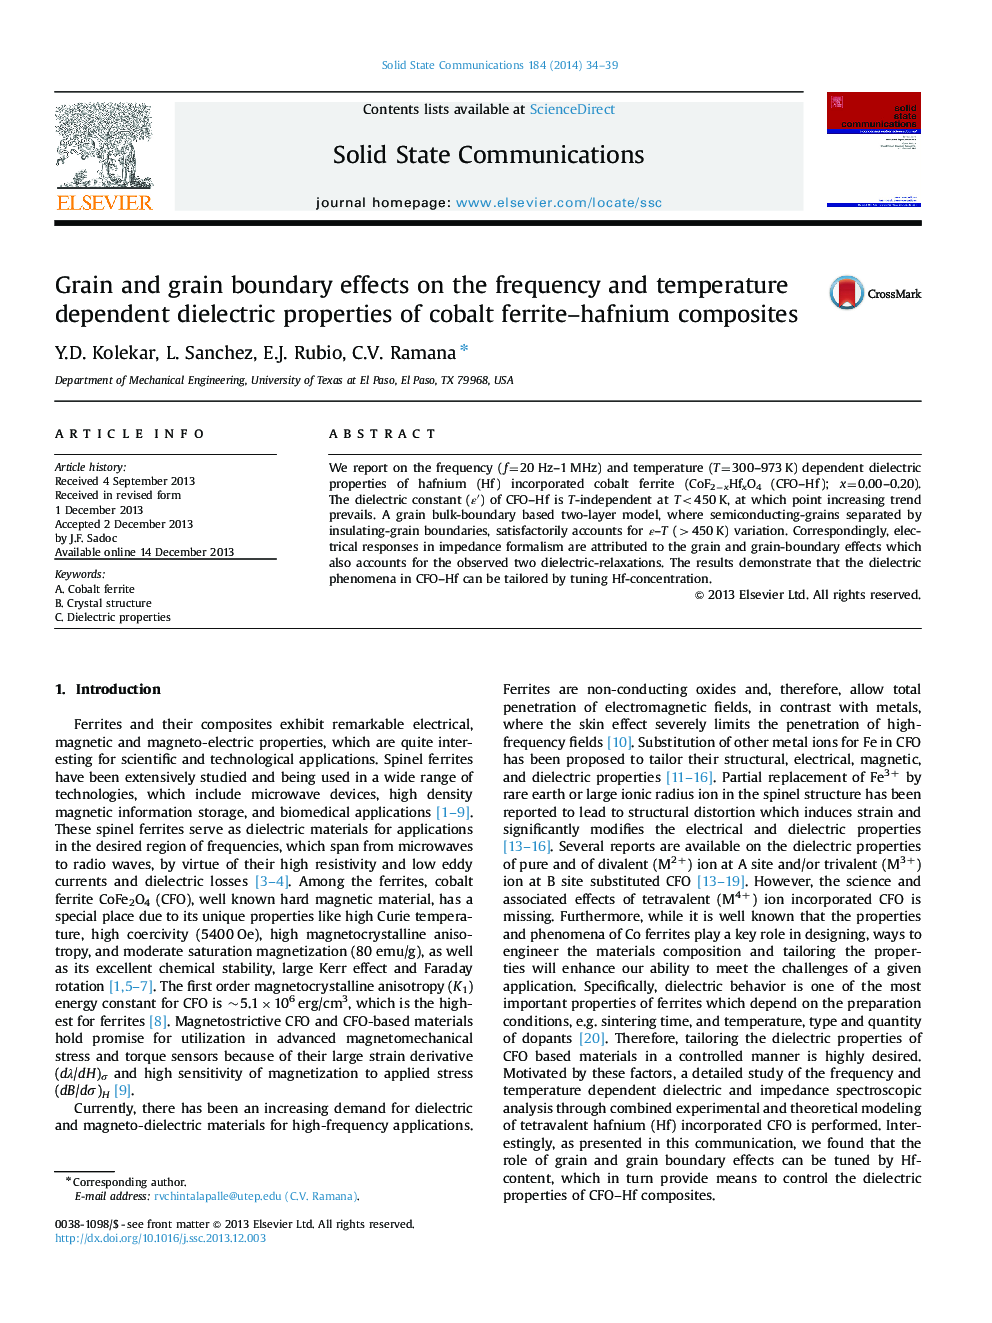 Grain and grain boundary effects on the frequency and temperature dependent dielectric properties of cobalt ferrite-hafnium composites